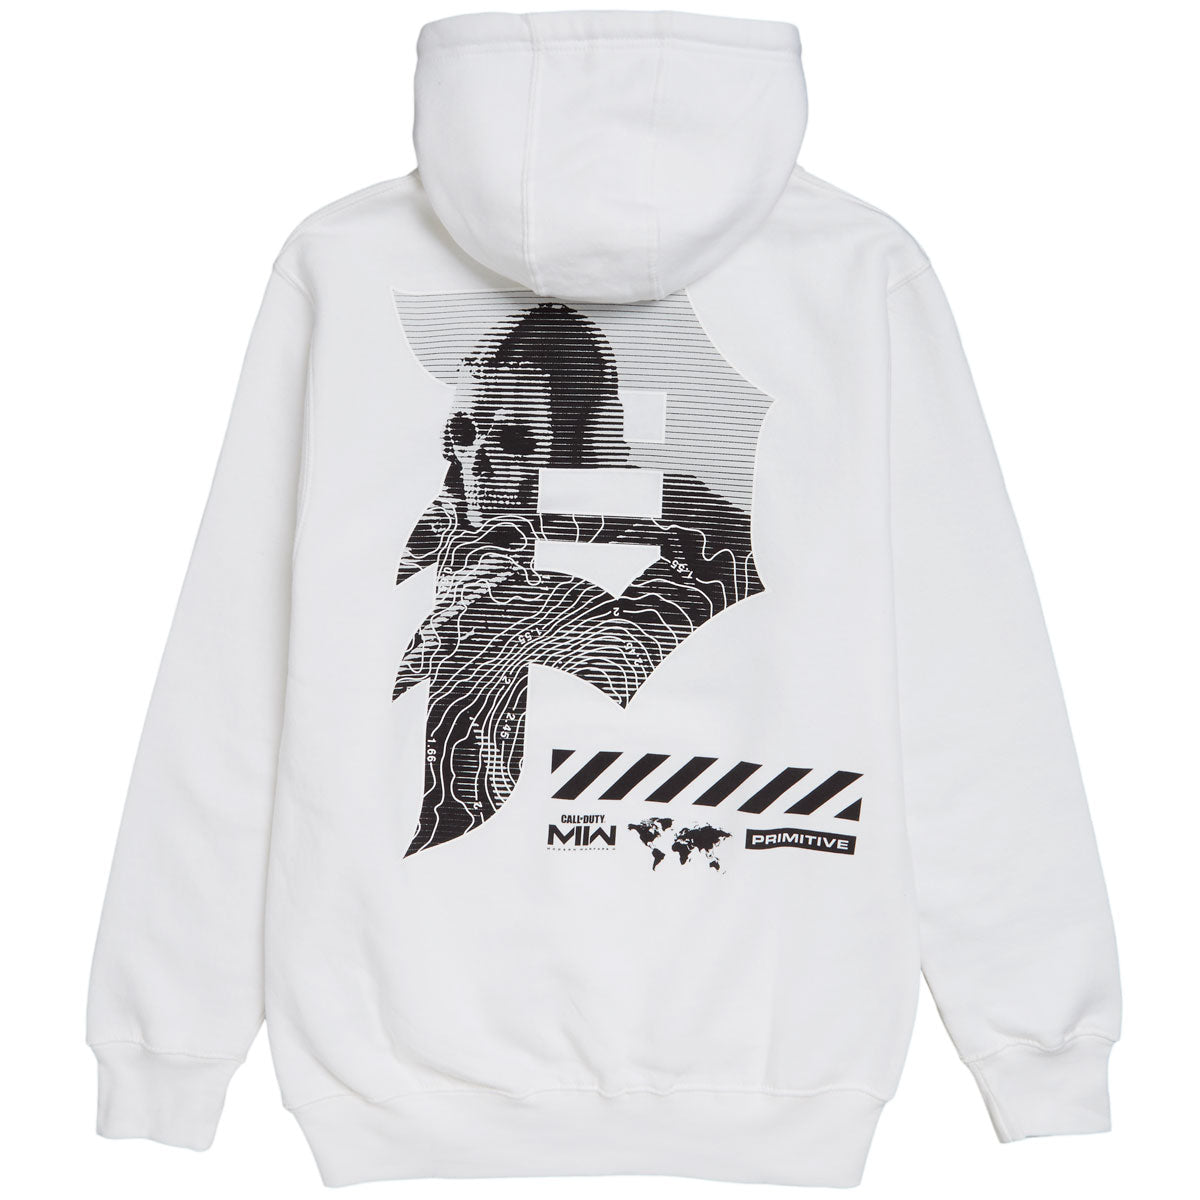 Primitive x Call Of Duty Mapping Dirty P Hoodie - White image 2